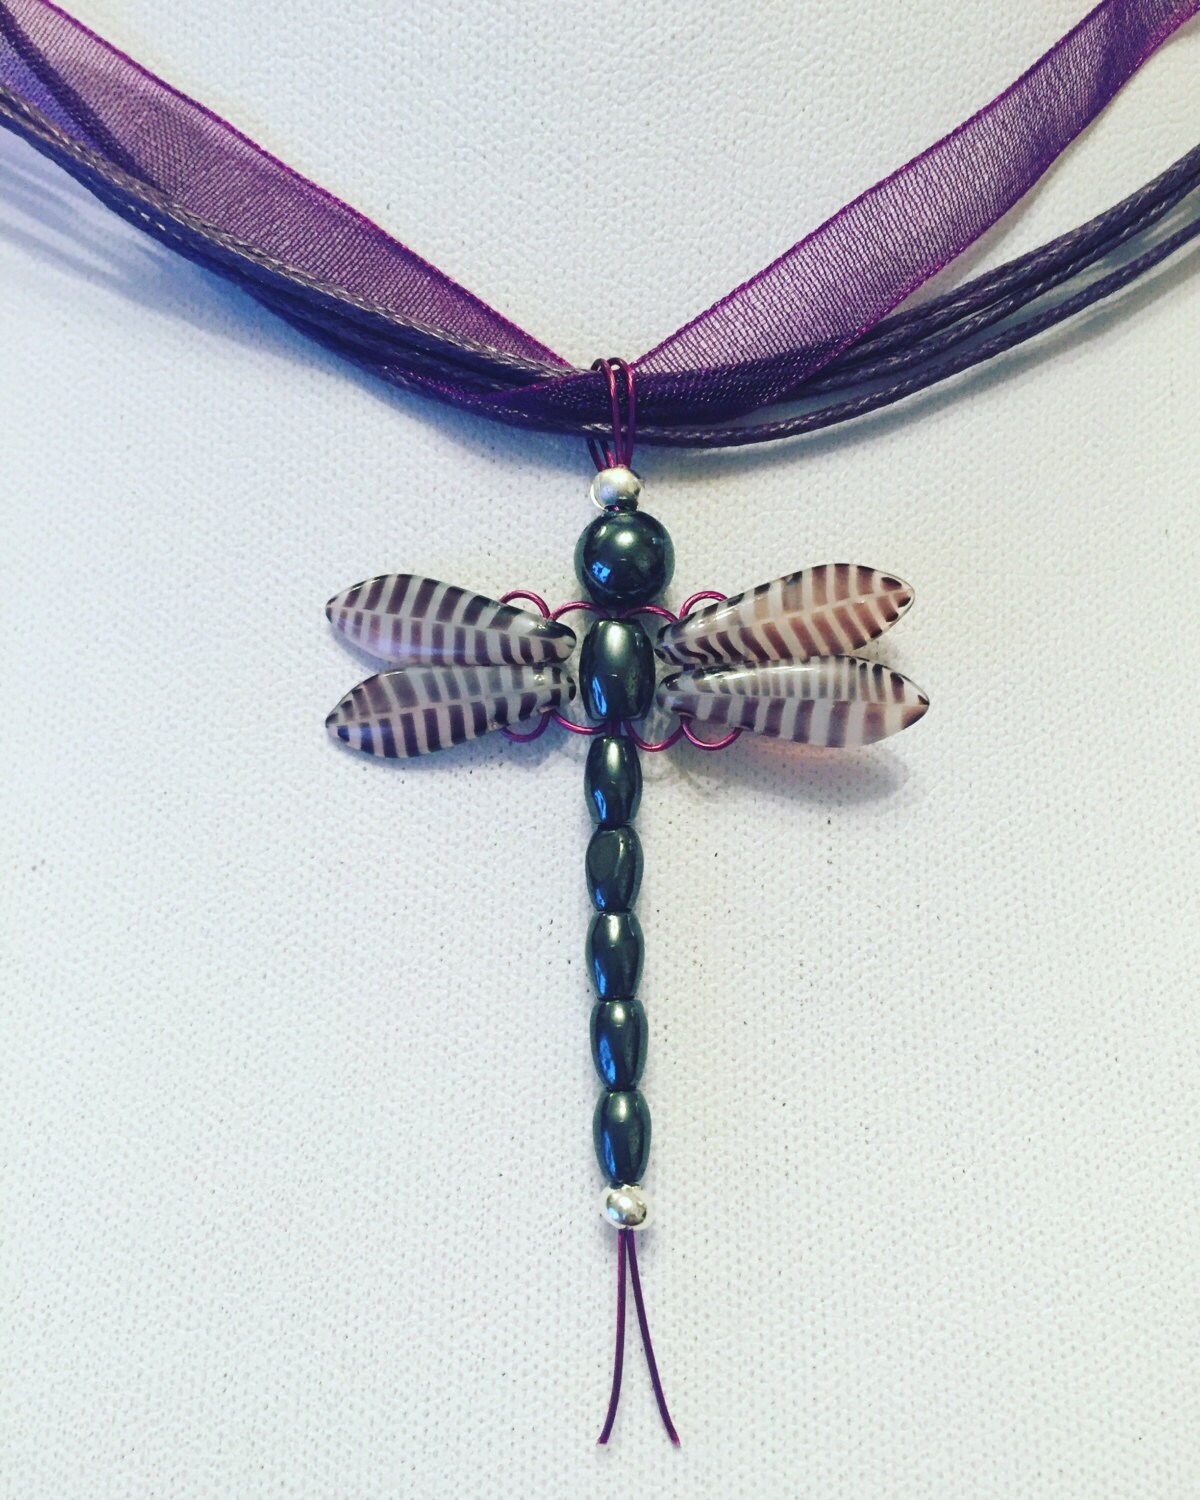 Dragonfly necklace dragonfly pendant beaded dragonfly